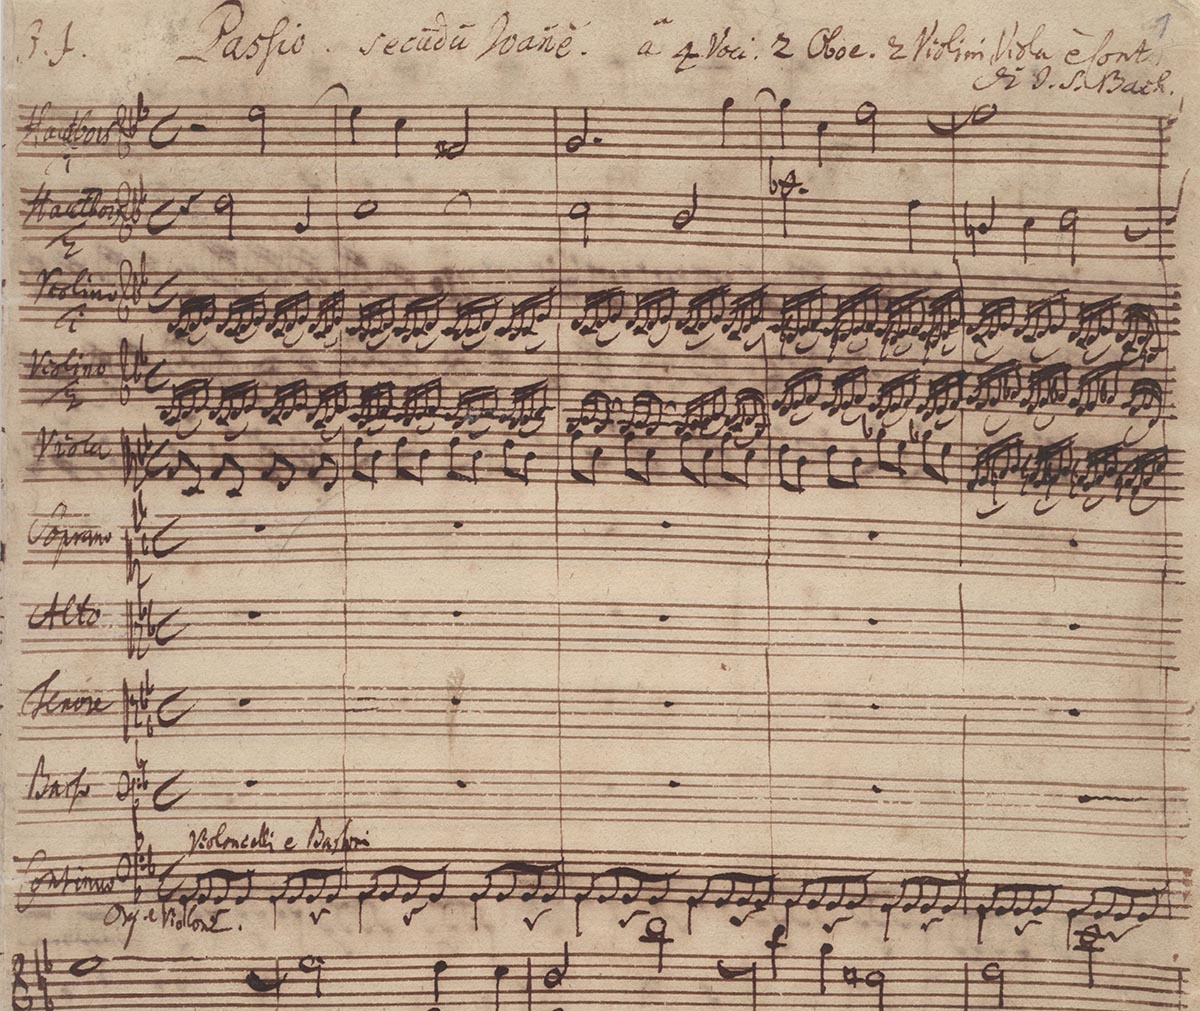 The first page of a surviving autograph manuscript of The St John Passion, dated c.1738